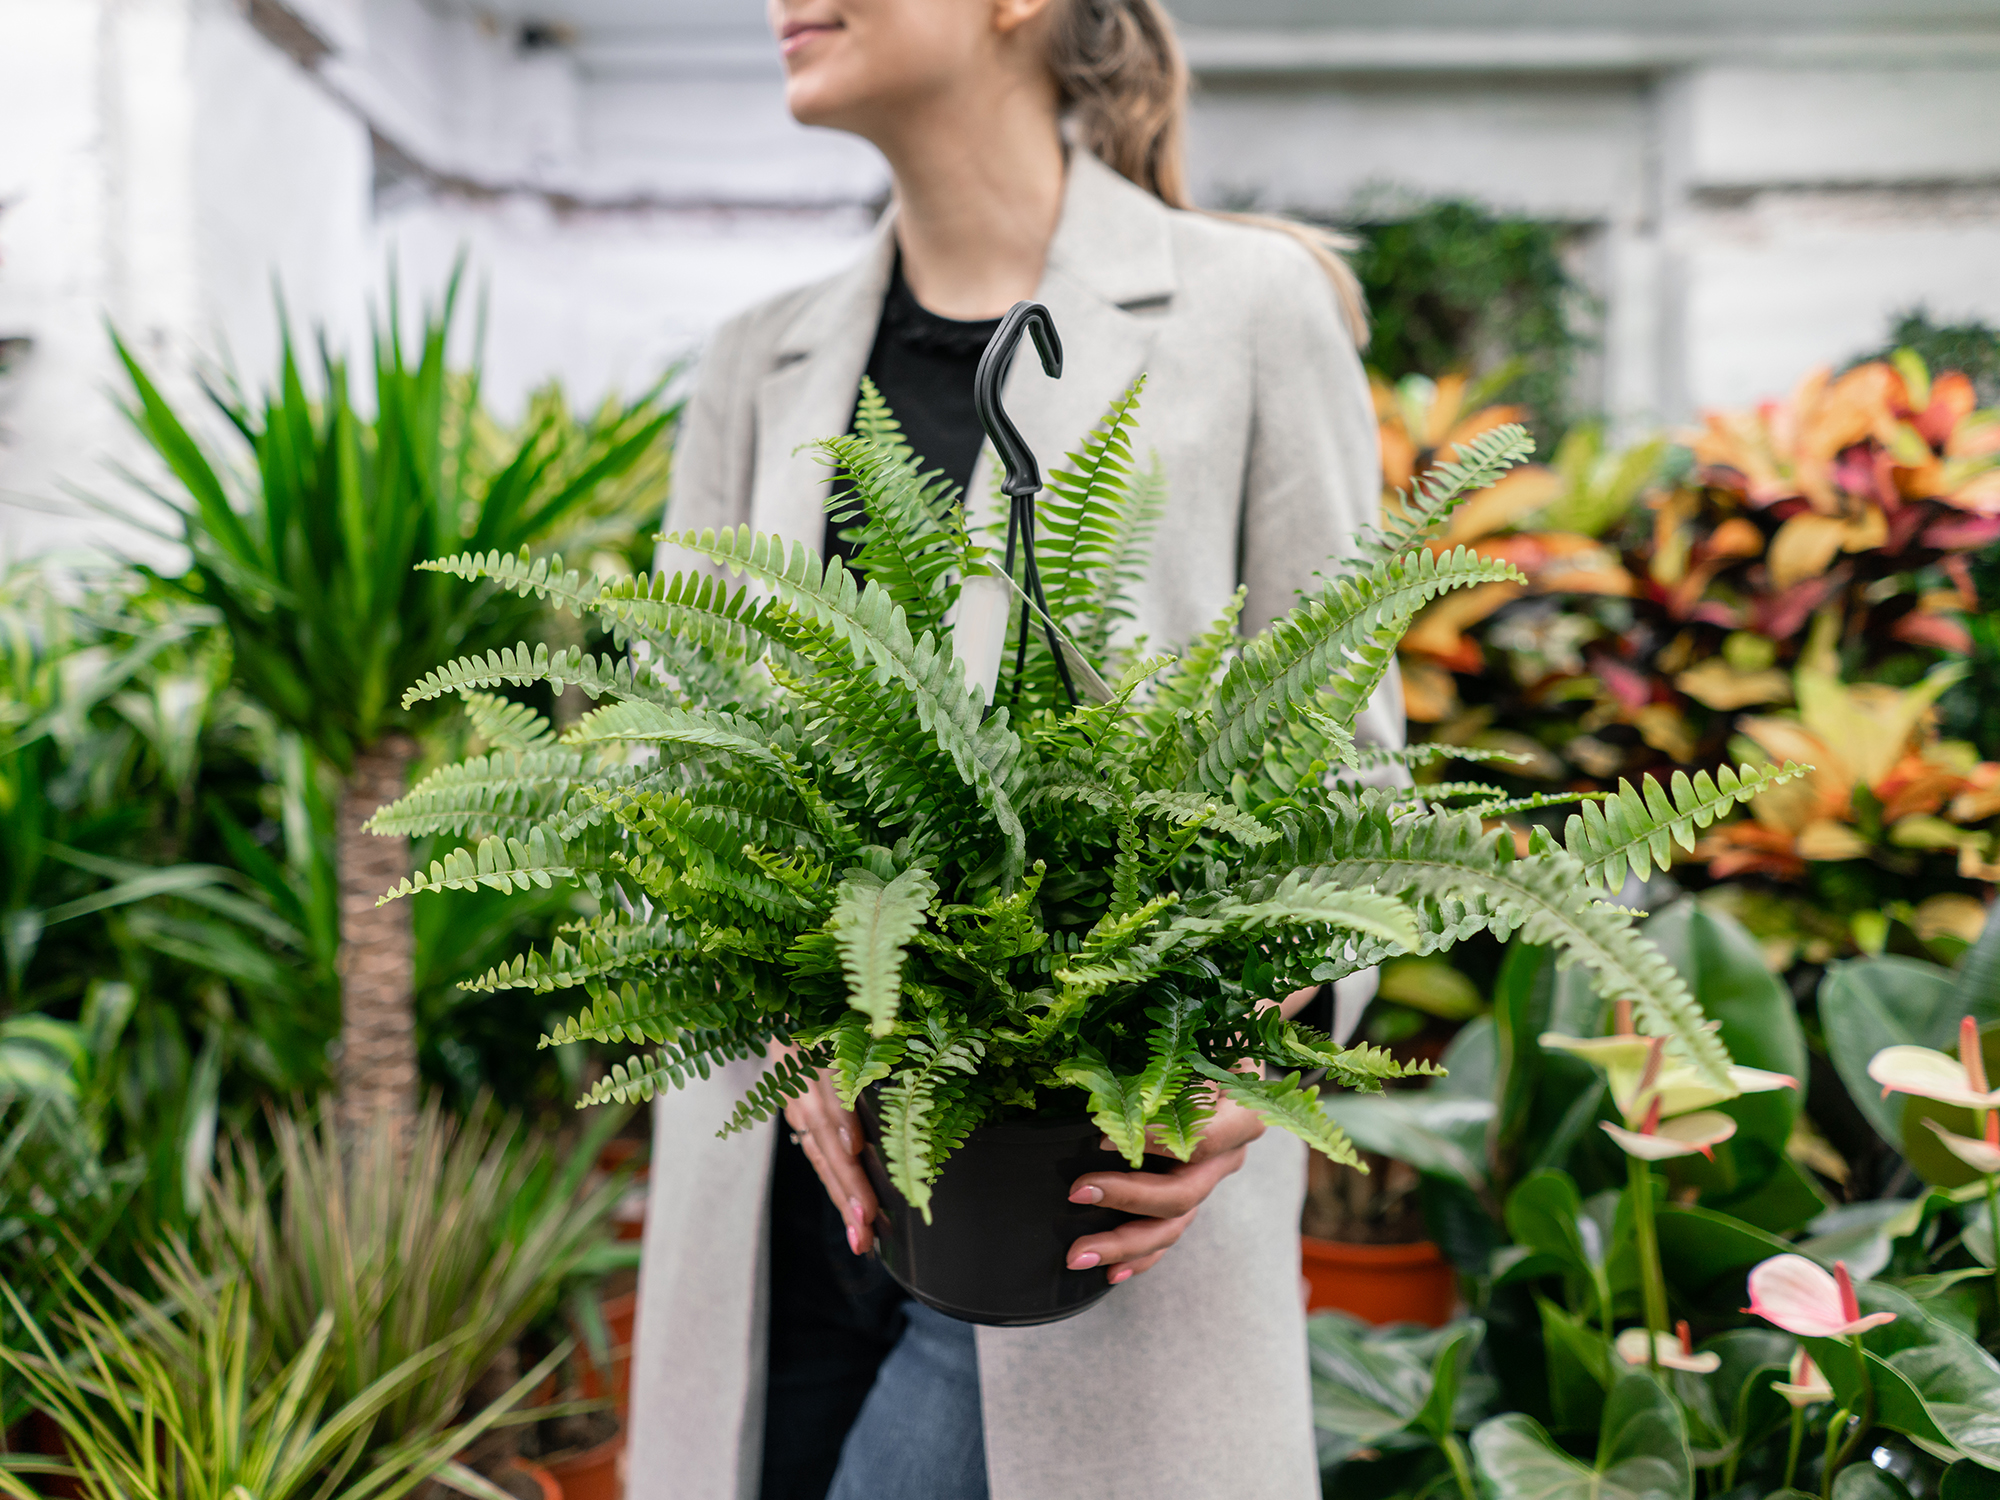 Learn how to spot a healthy houseplant in the store